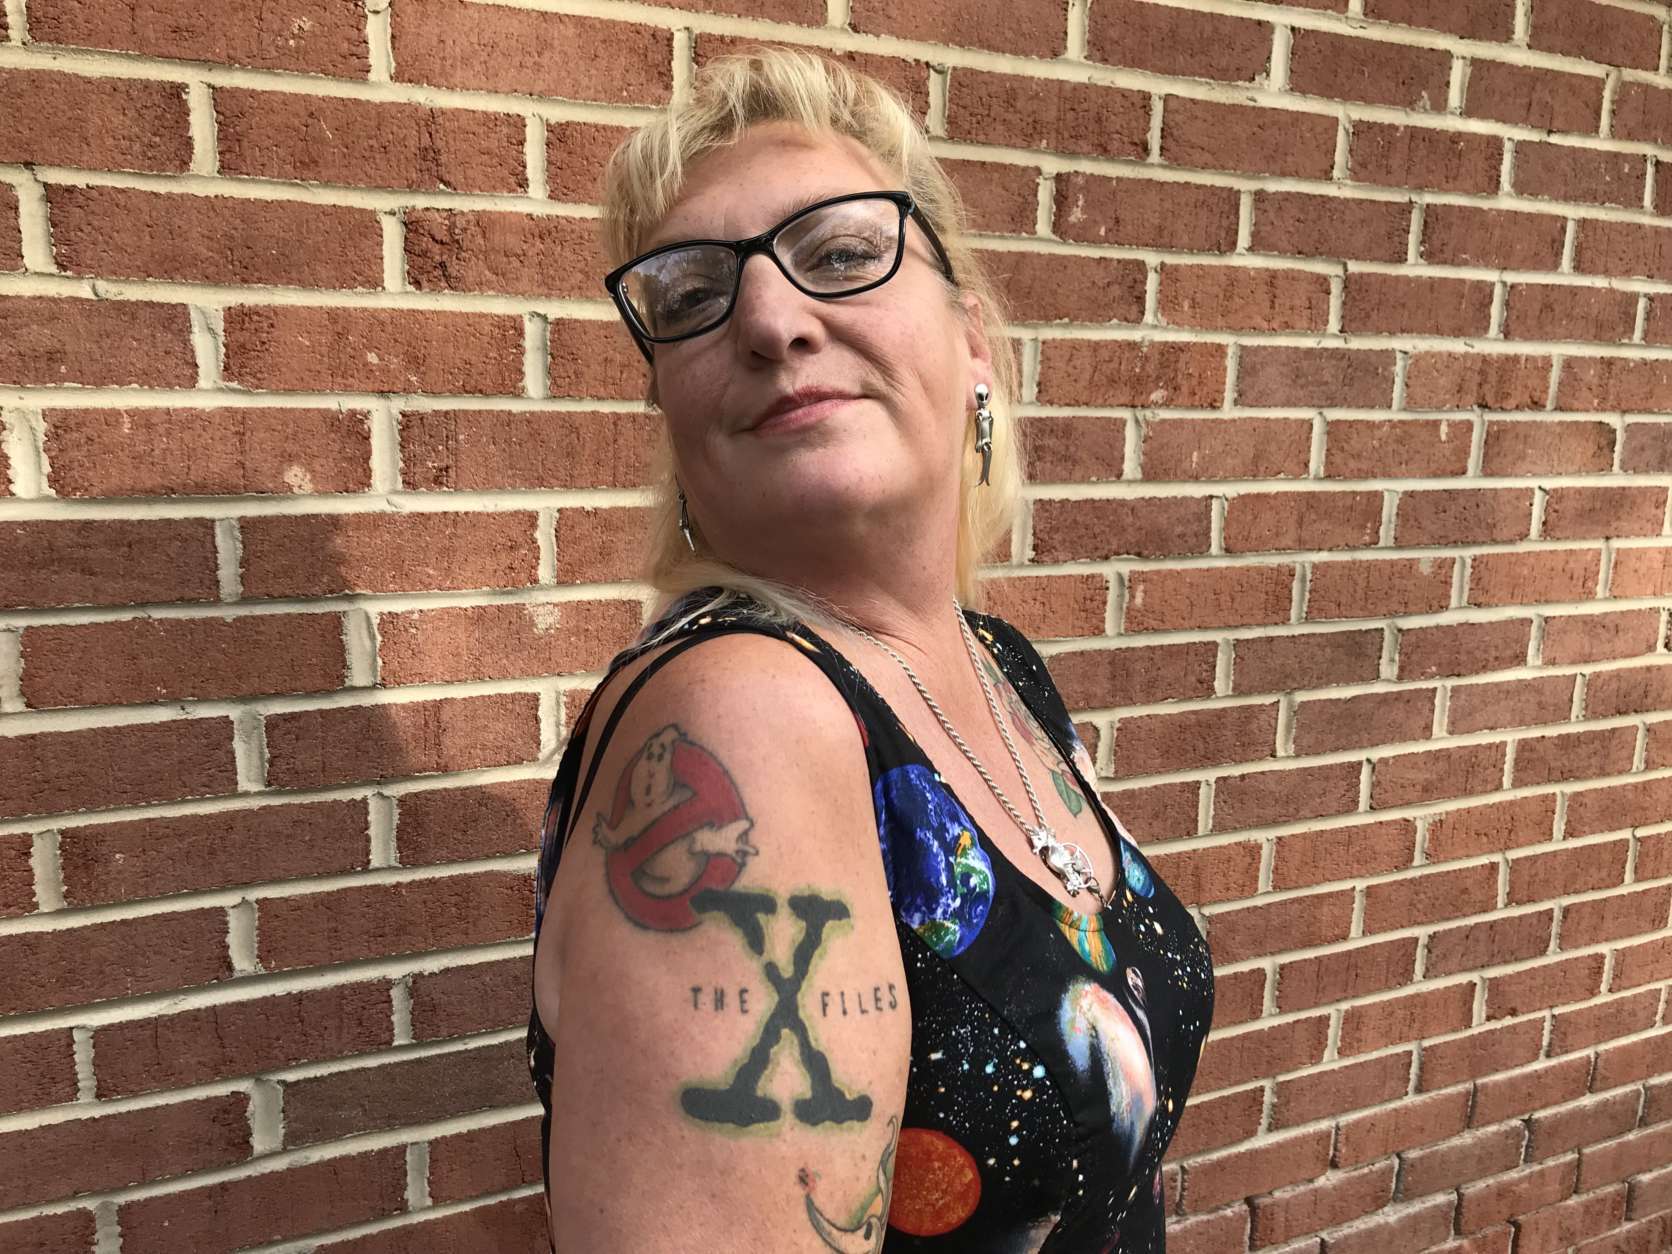 This woman attending the “Mysteries of Space and Sky” UFO conference last October in Gambrills, Maryland, showed off her Ghostbusters and X-Files tattoos. (WTOP/Michelle Basch)